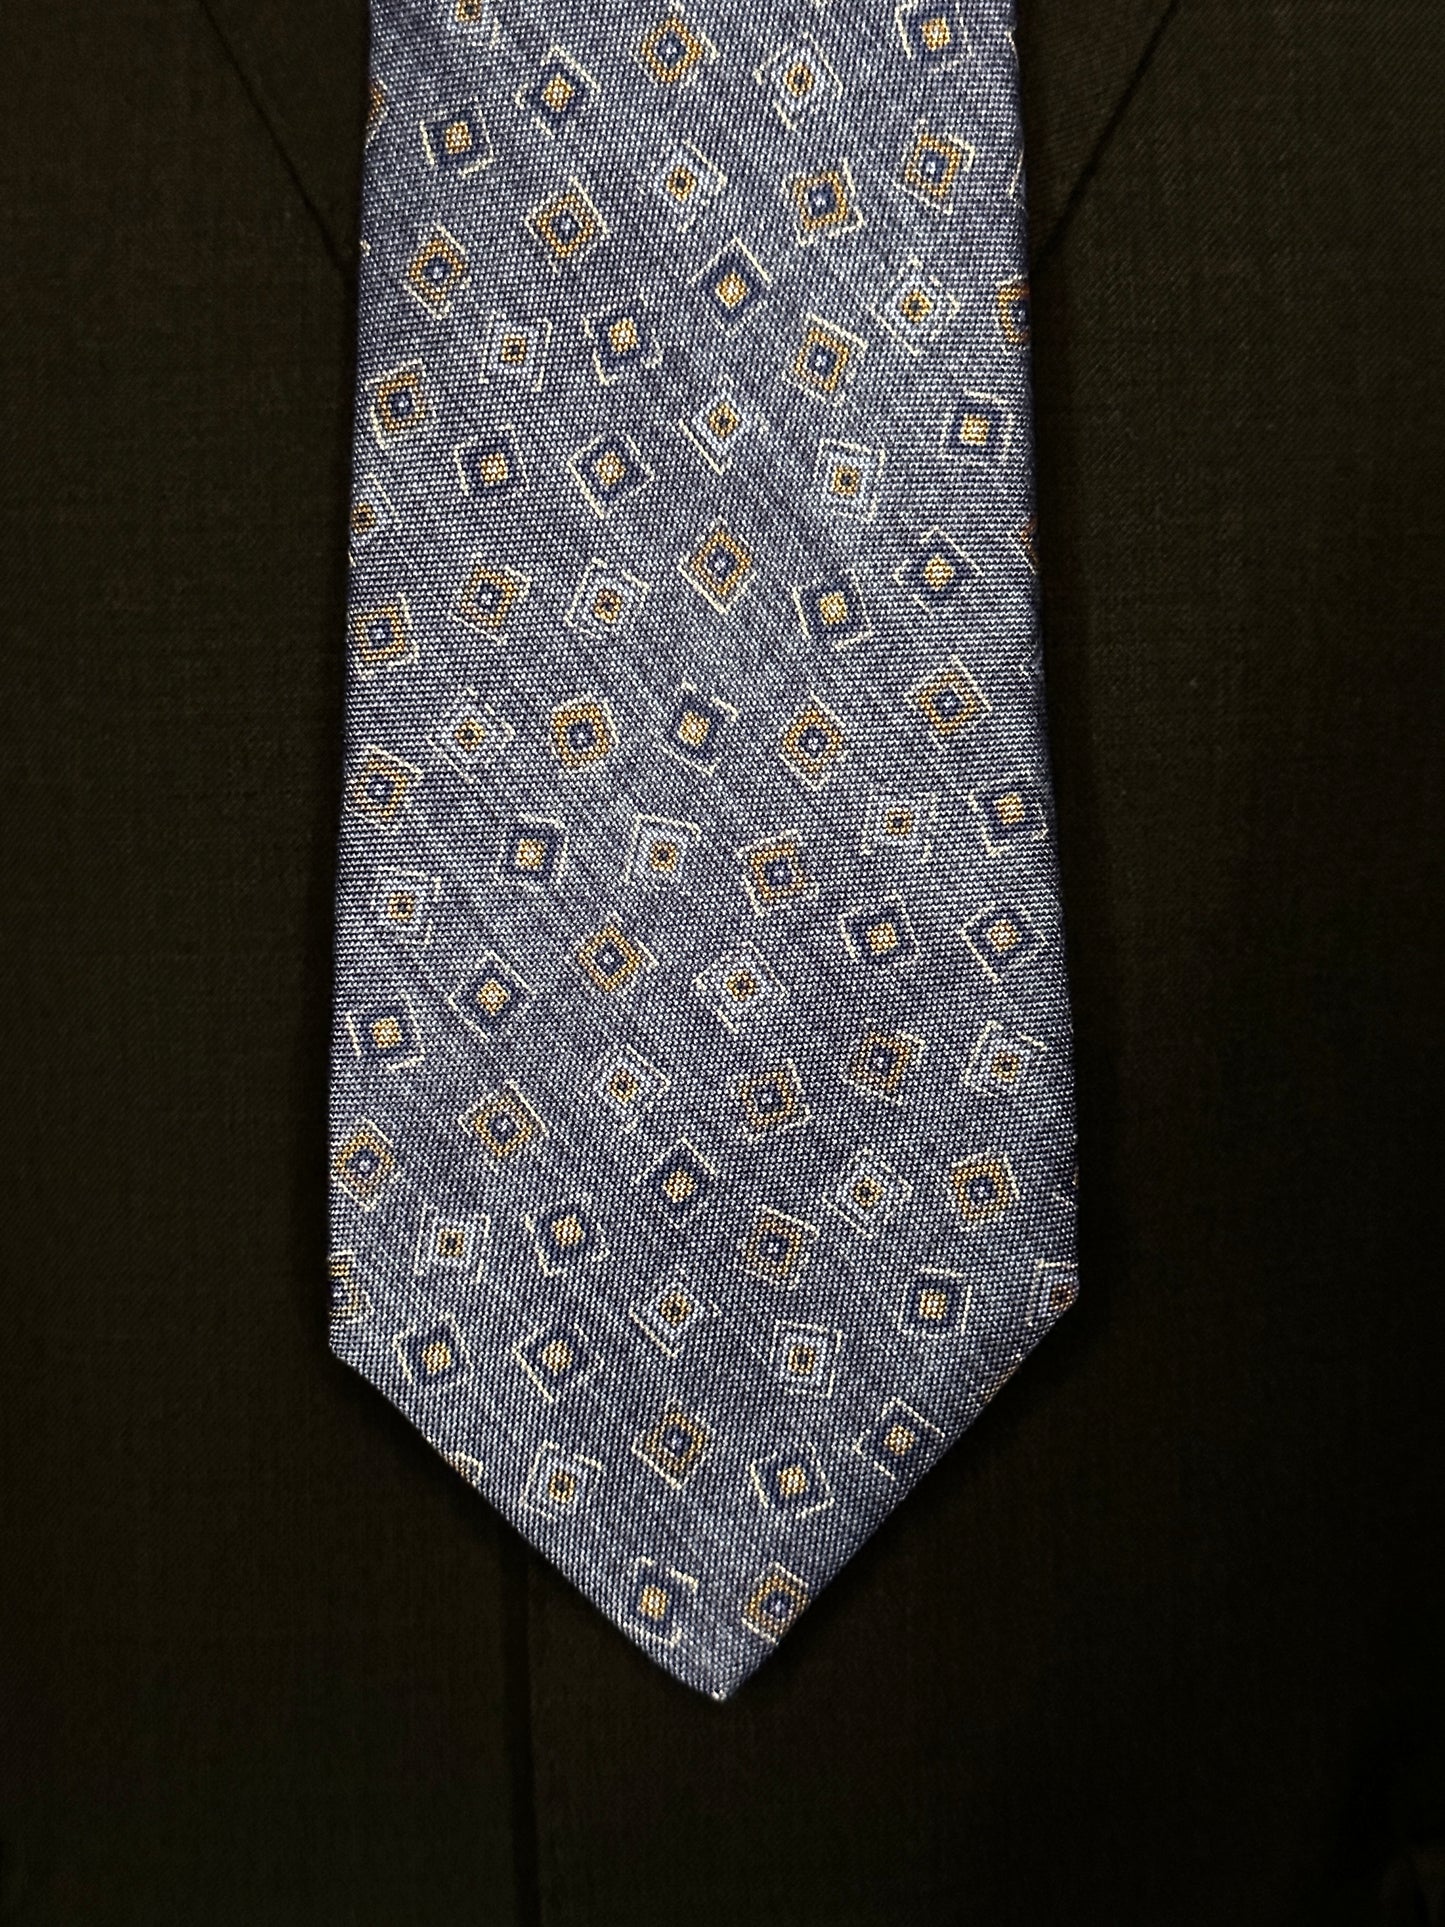 A 100% silk tie in pastel blue that has the characteristics and feel of linen. For those light weight summer outfits and thin cotton summer dress shirts, including Swiss voile, you need a tie that carries the same type of personality. The weave of this silk looks like the weave of pure linen, but has the smooth feel of silk.